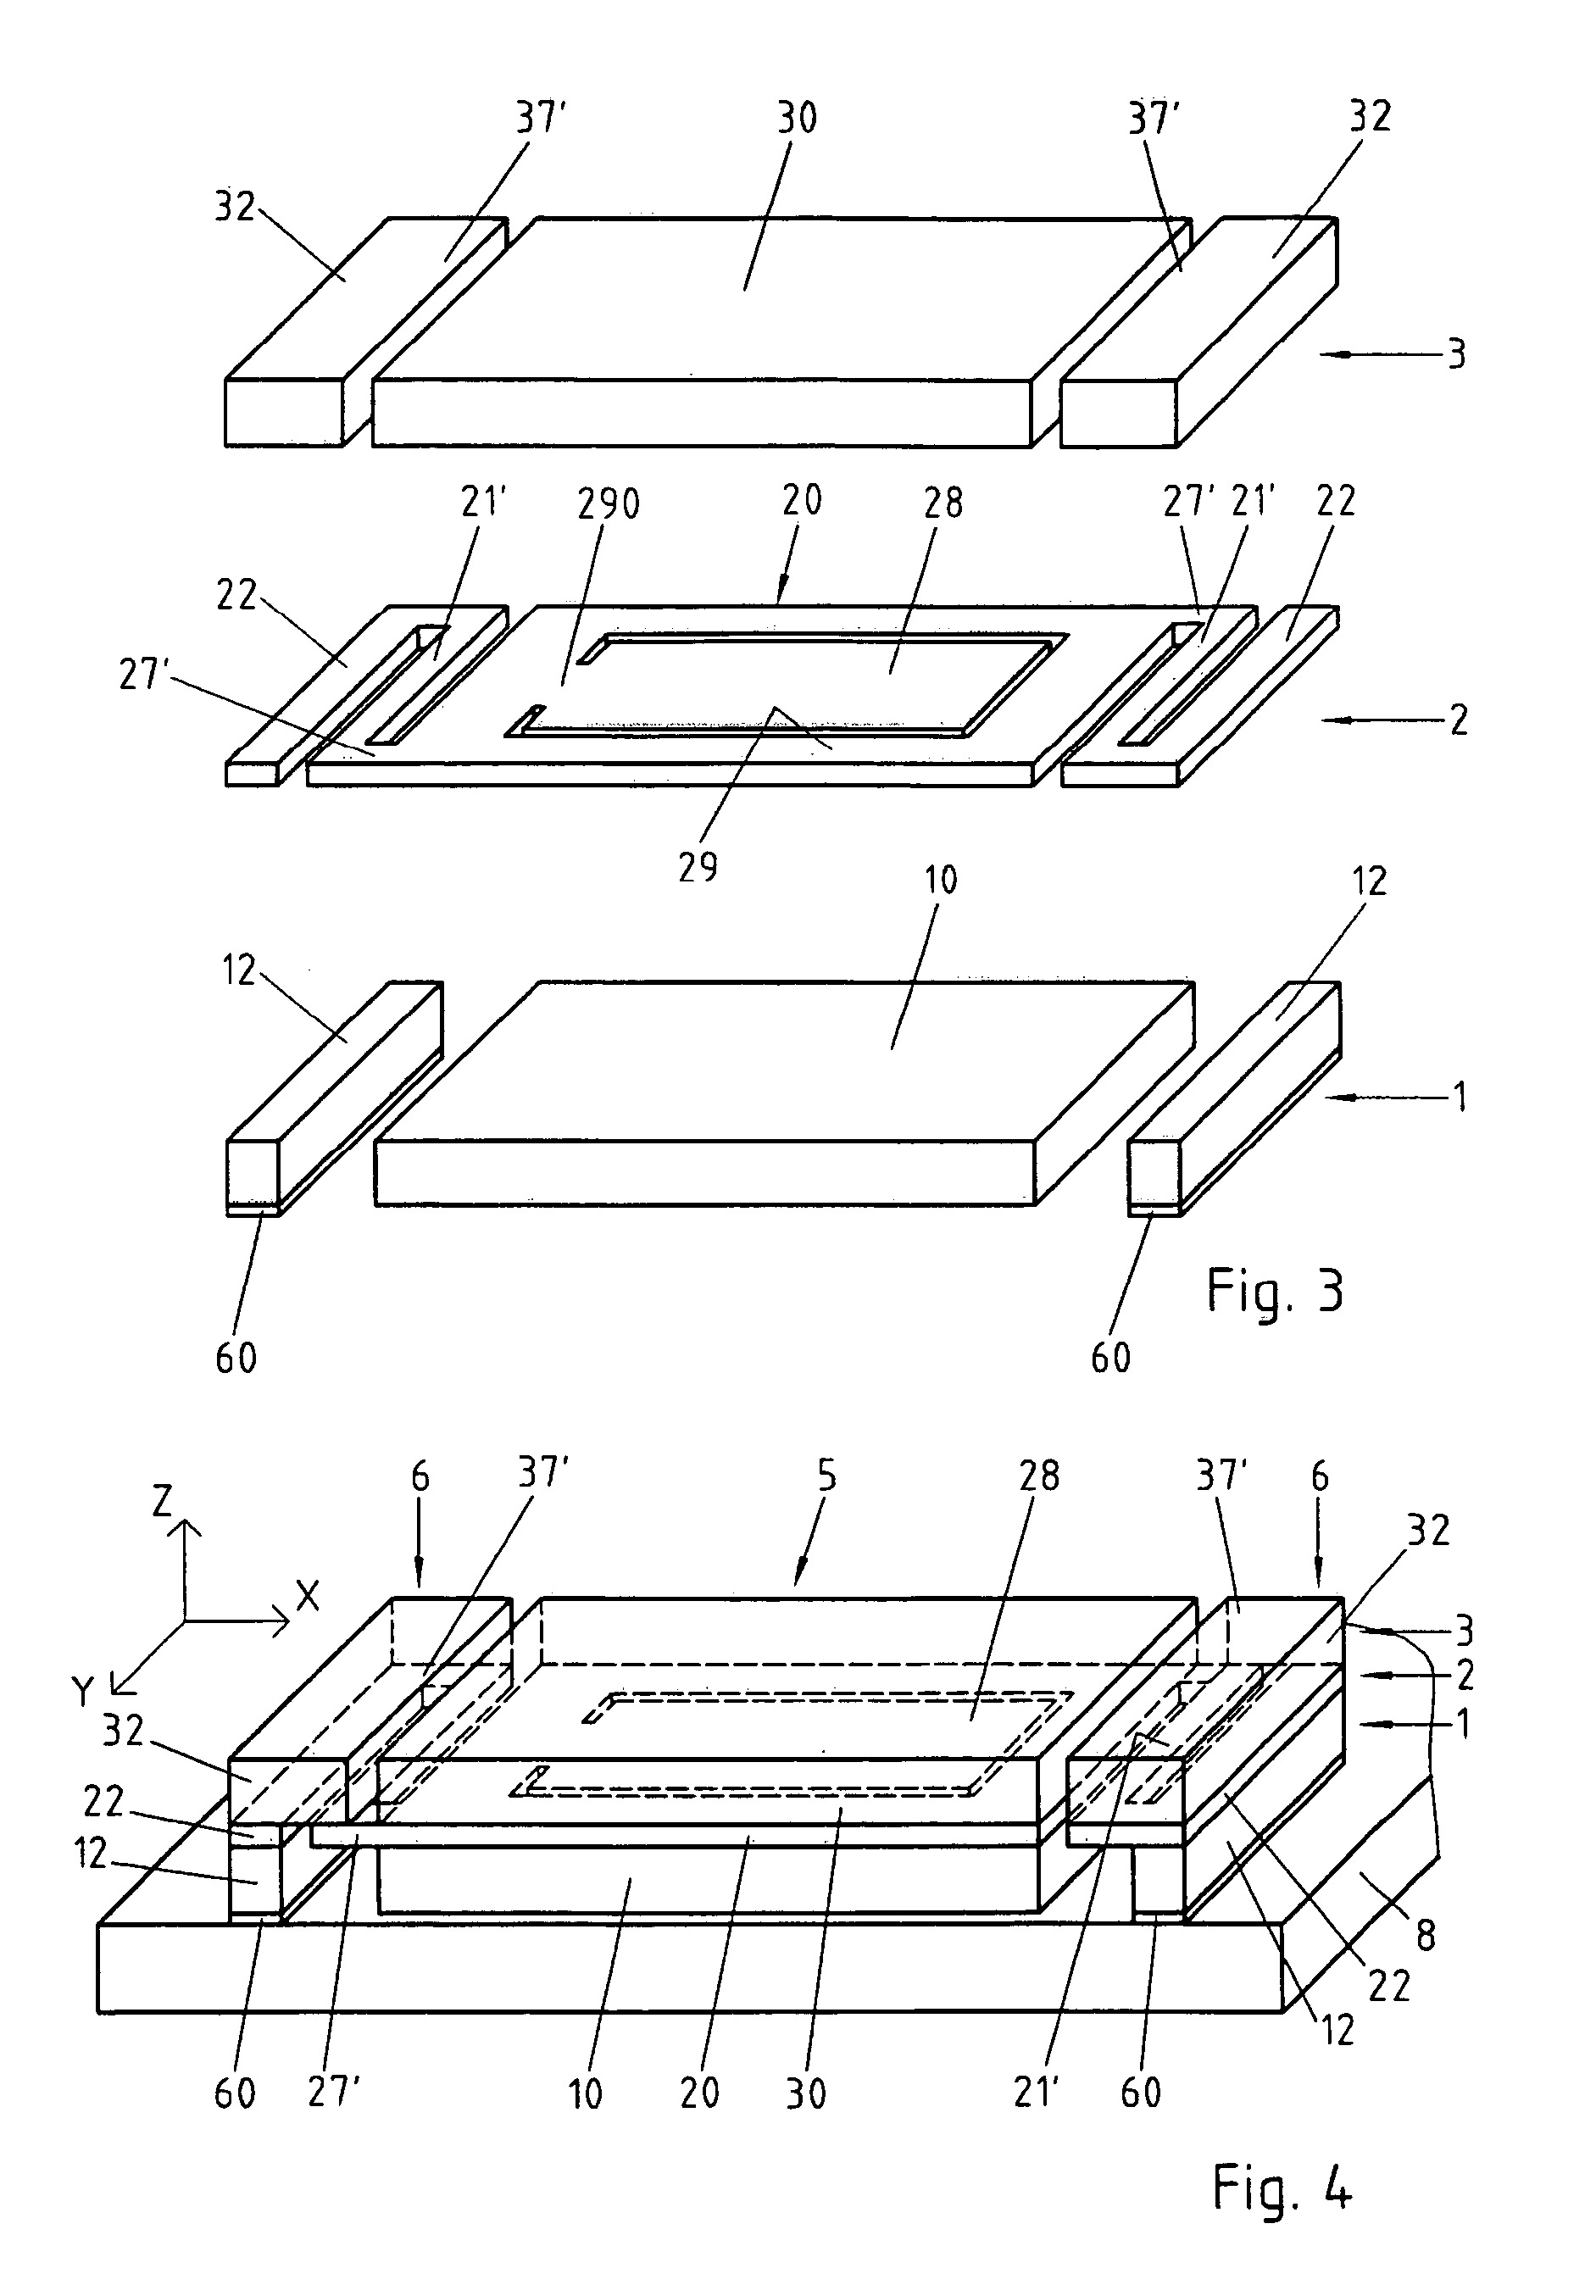 Microelectromechanical system